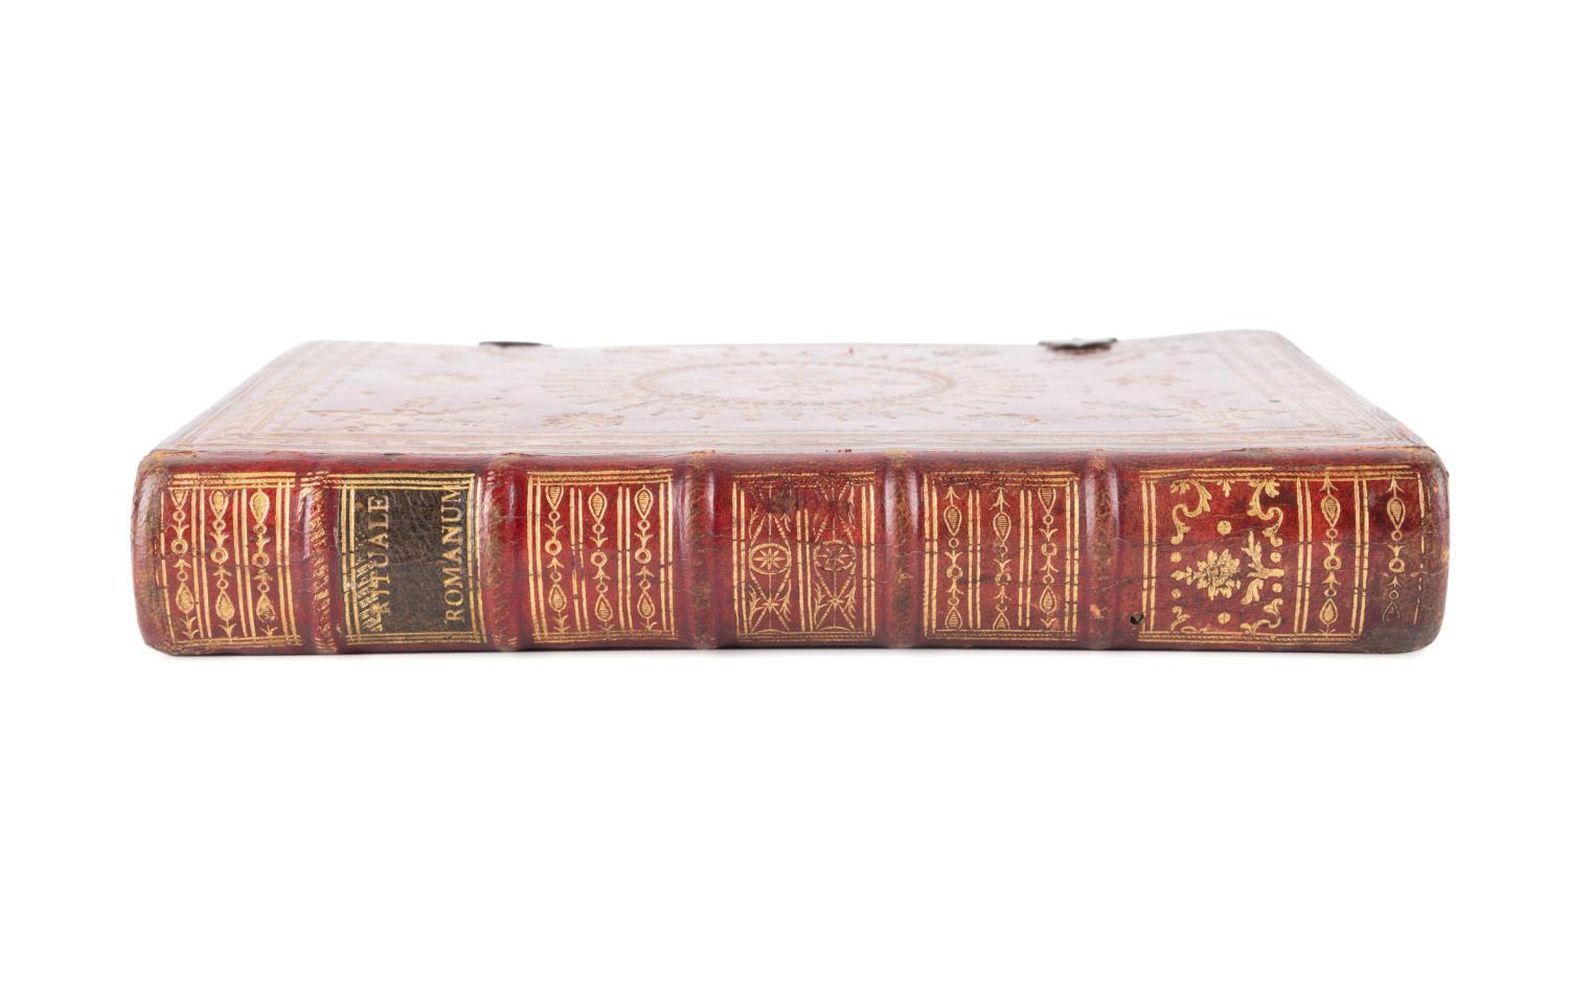 FORE-EDGE PAINTED BOOK, RITUALE